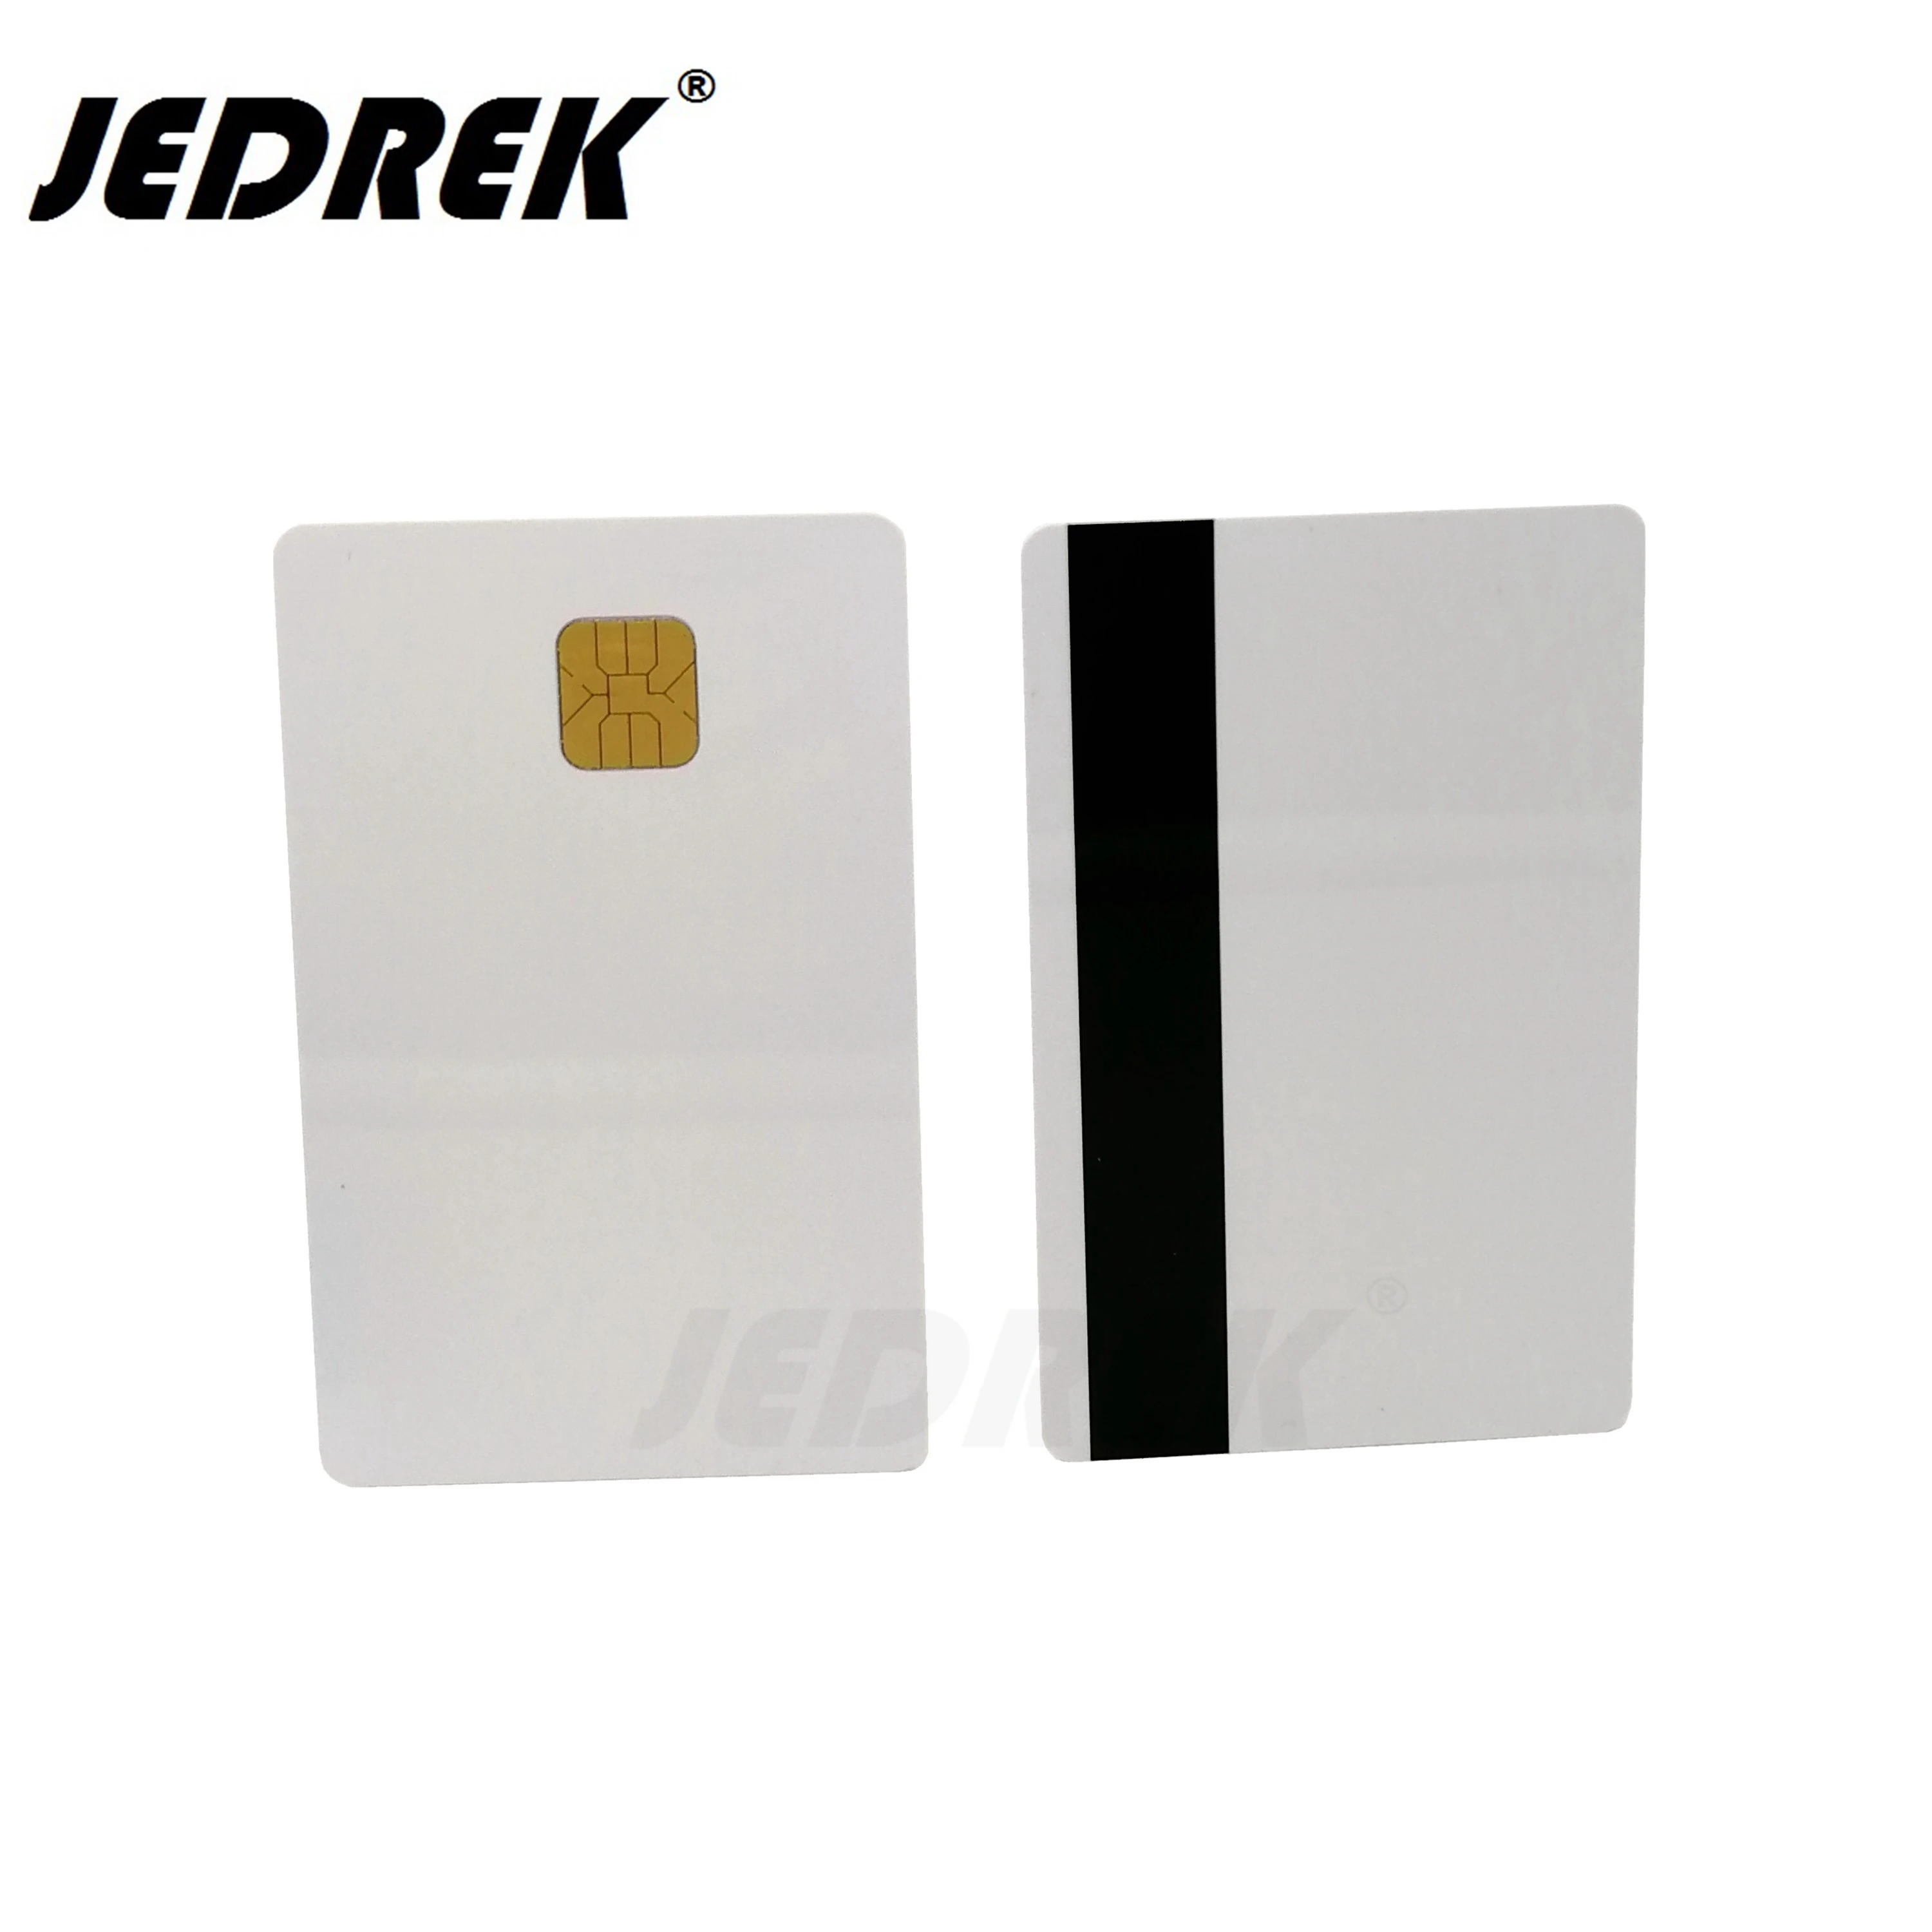 12 pcs Smart IC card with SLE 4428 chip magnetic stripe HiCo Contact PVC card 